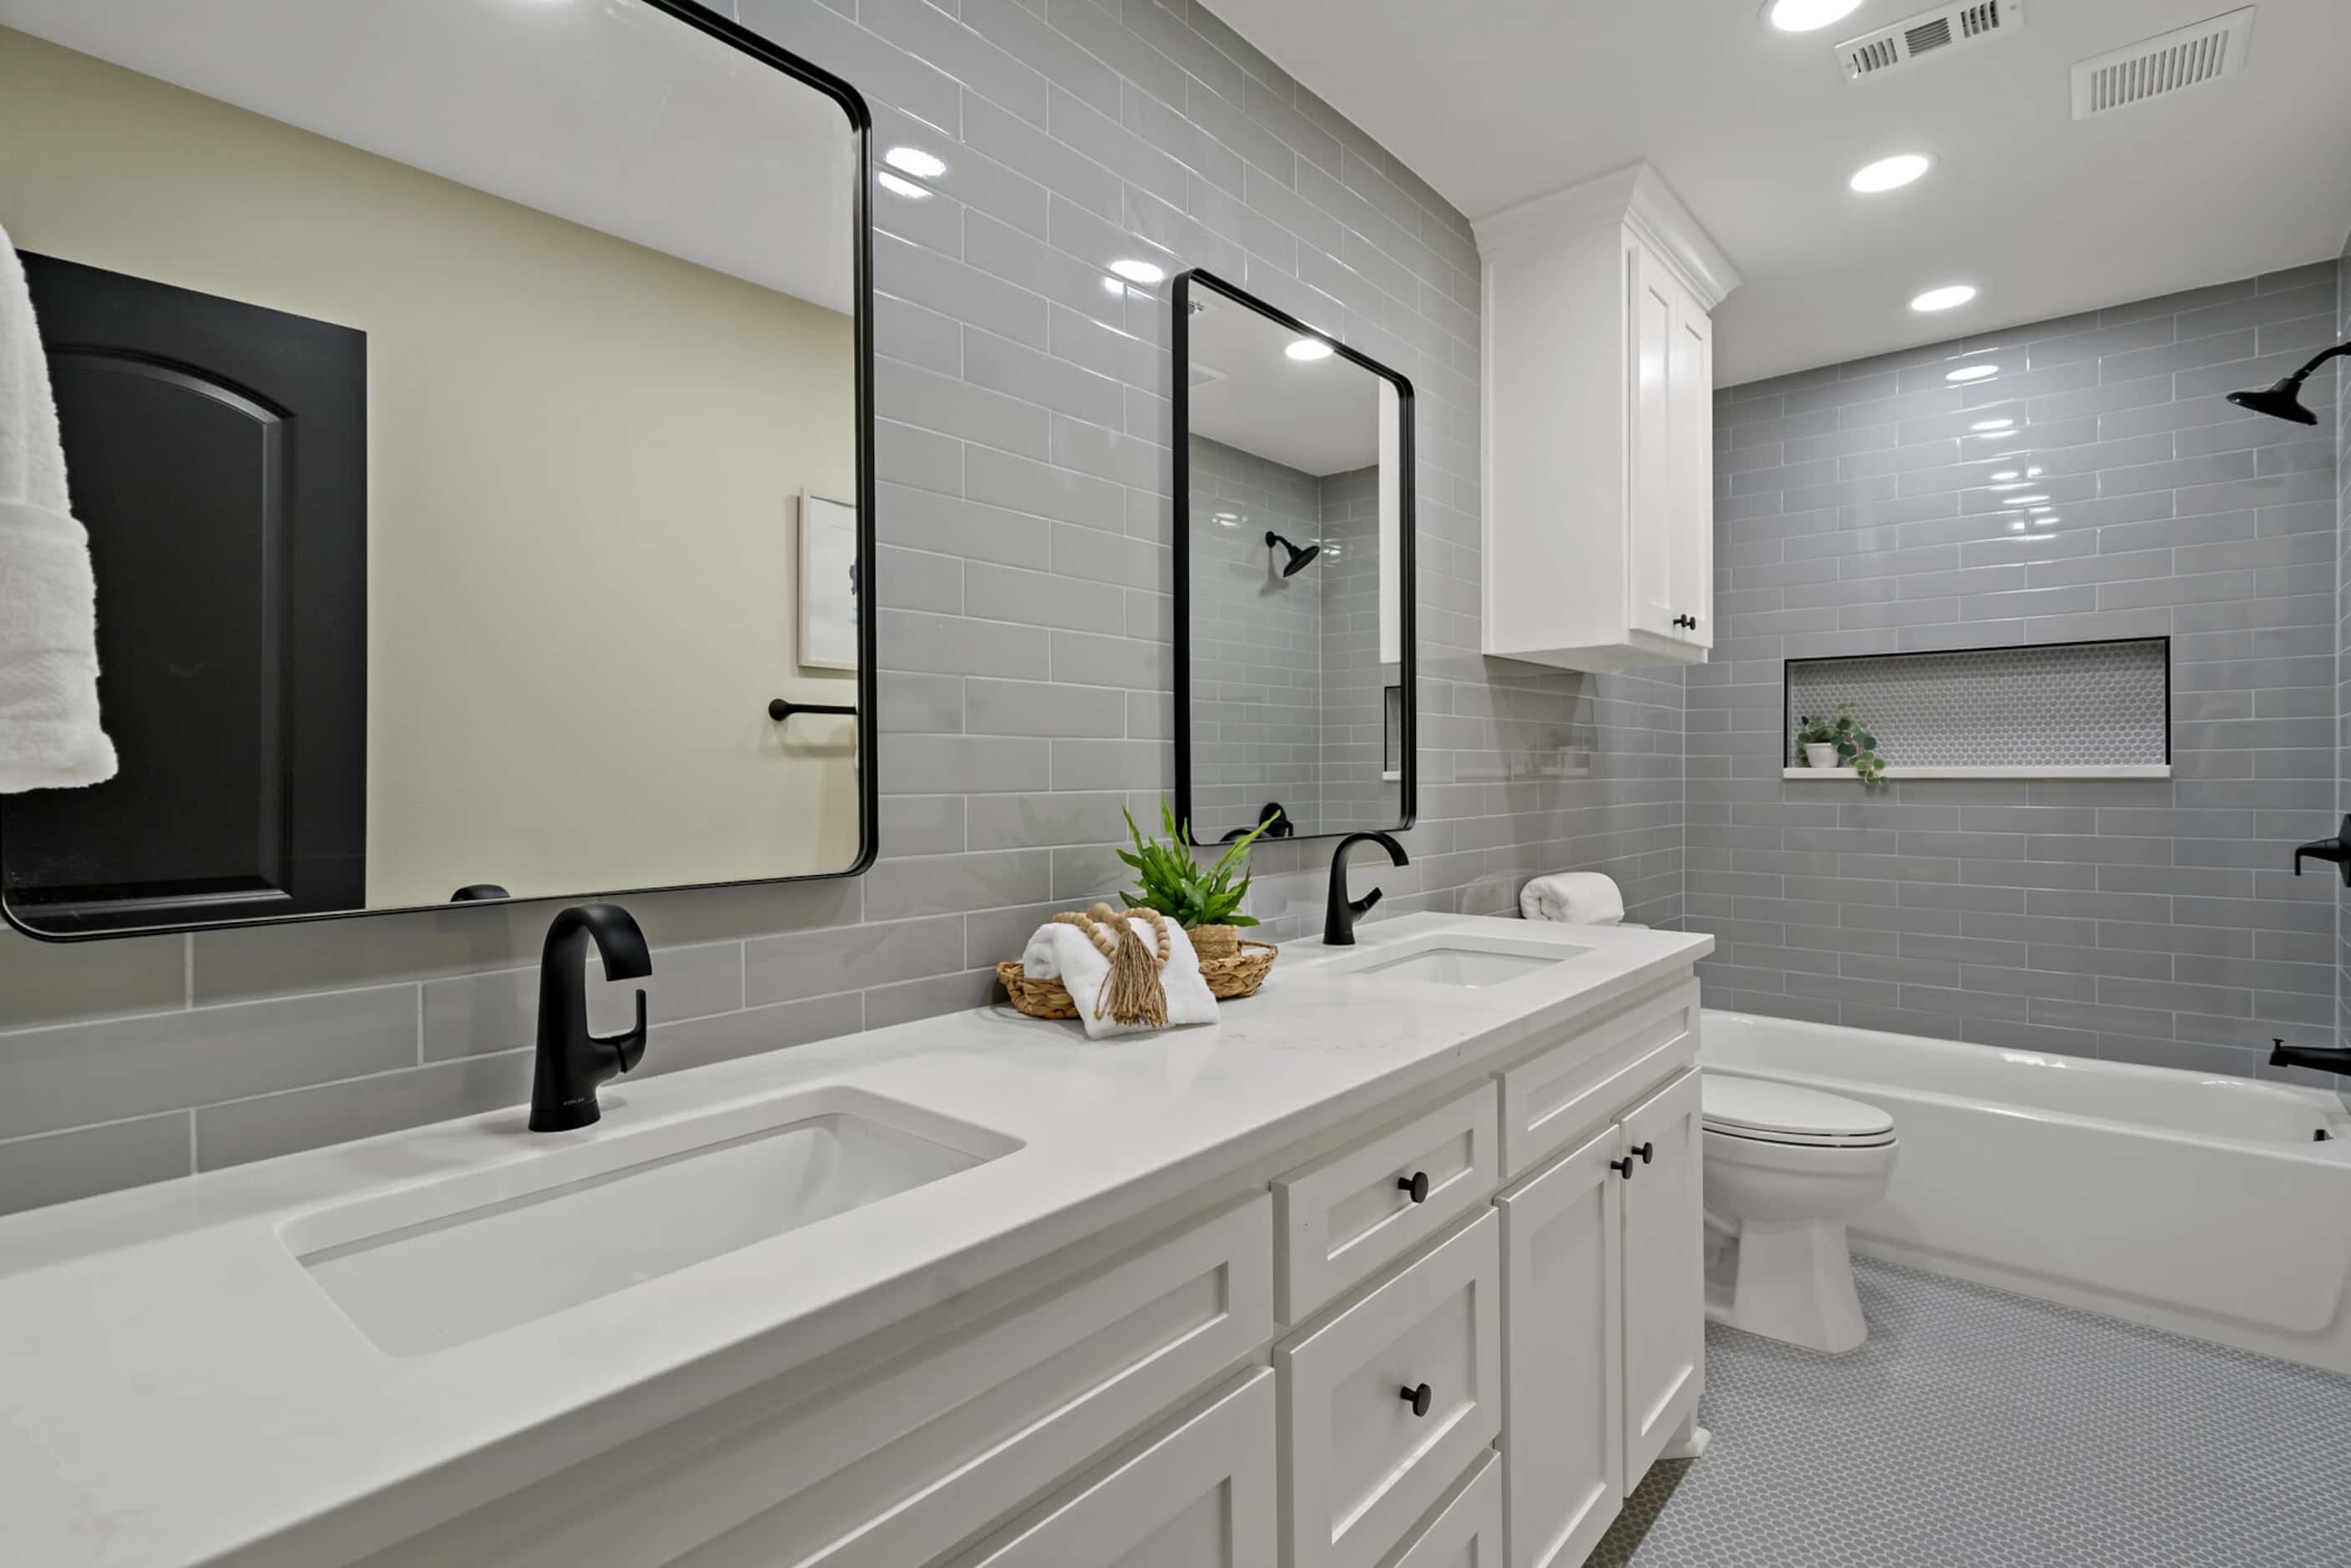 Bathroom with gray tile on walls and floors, white countertops and cabinetry, dual sinks,...